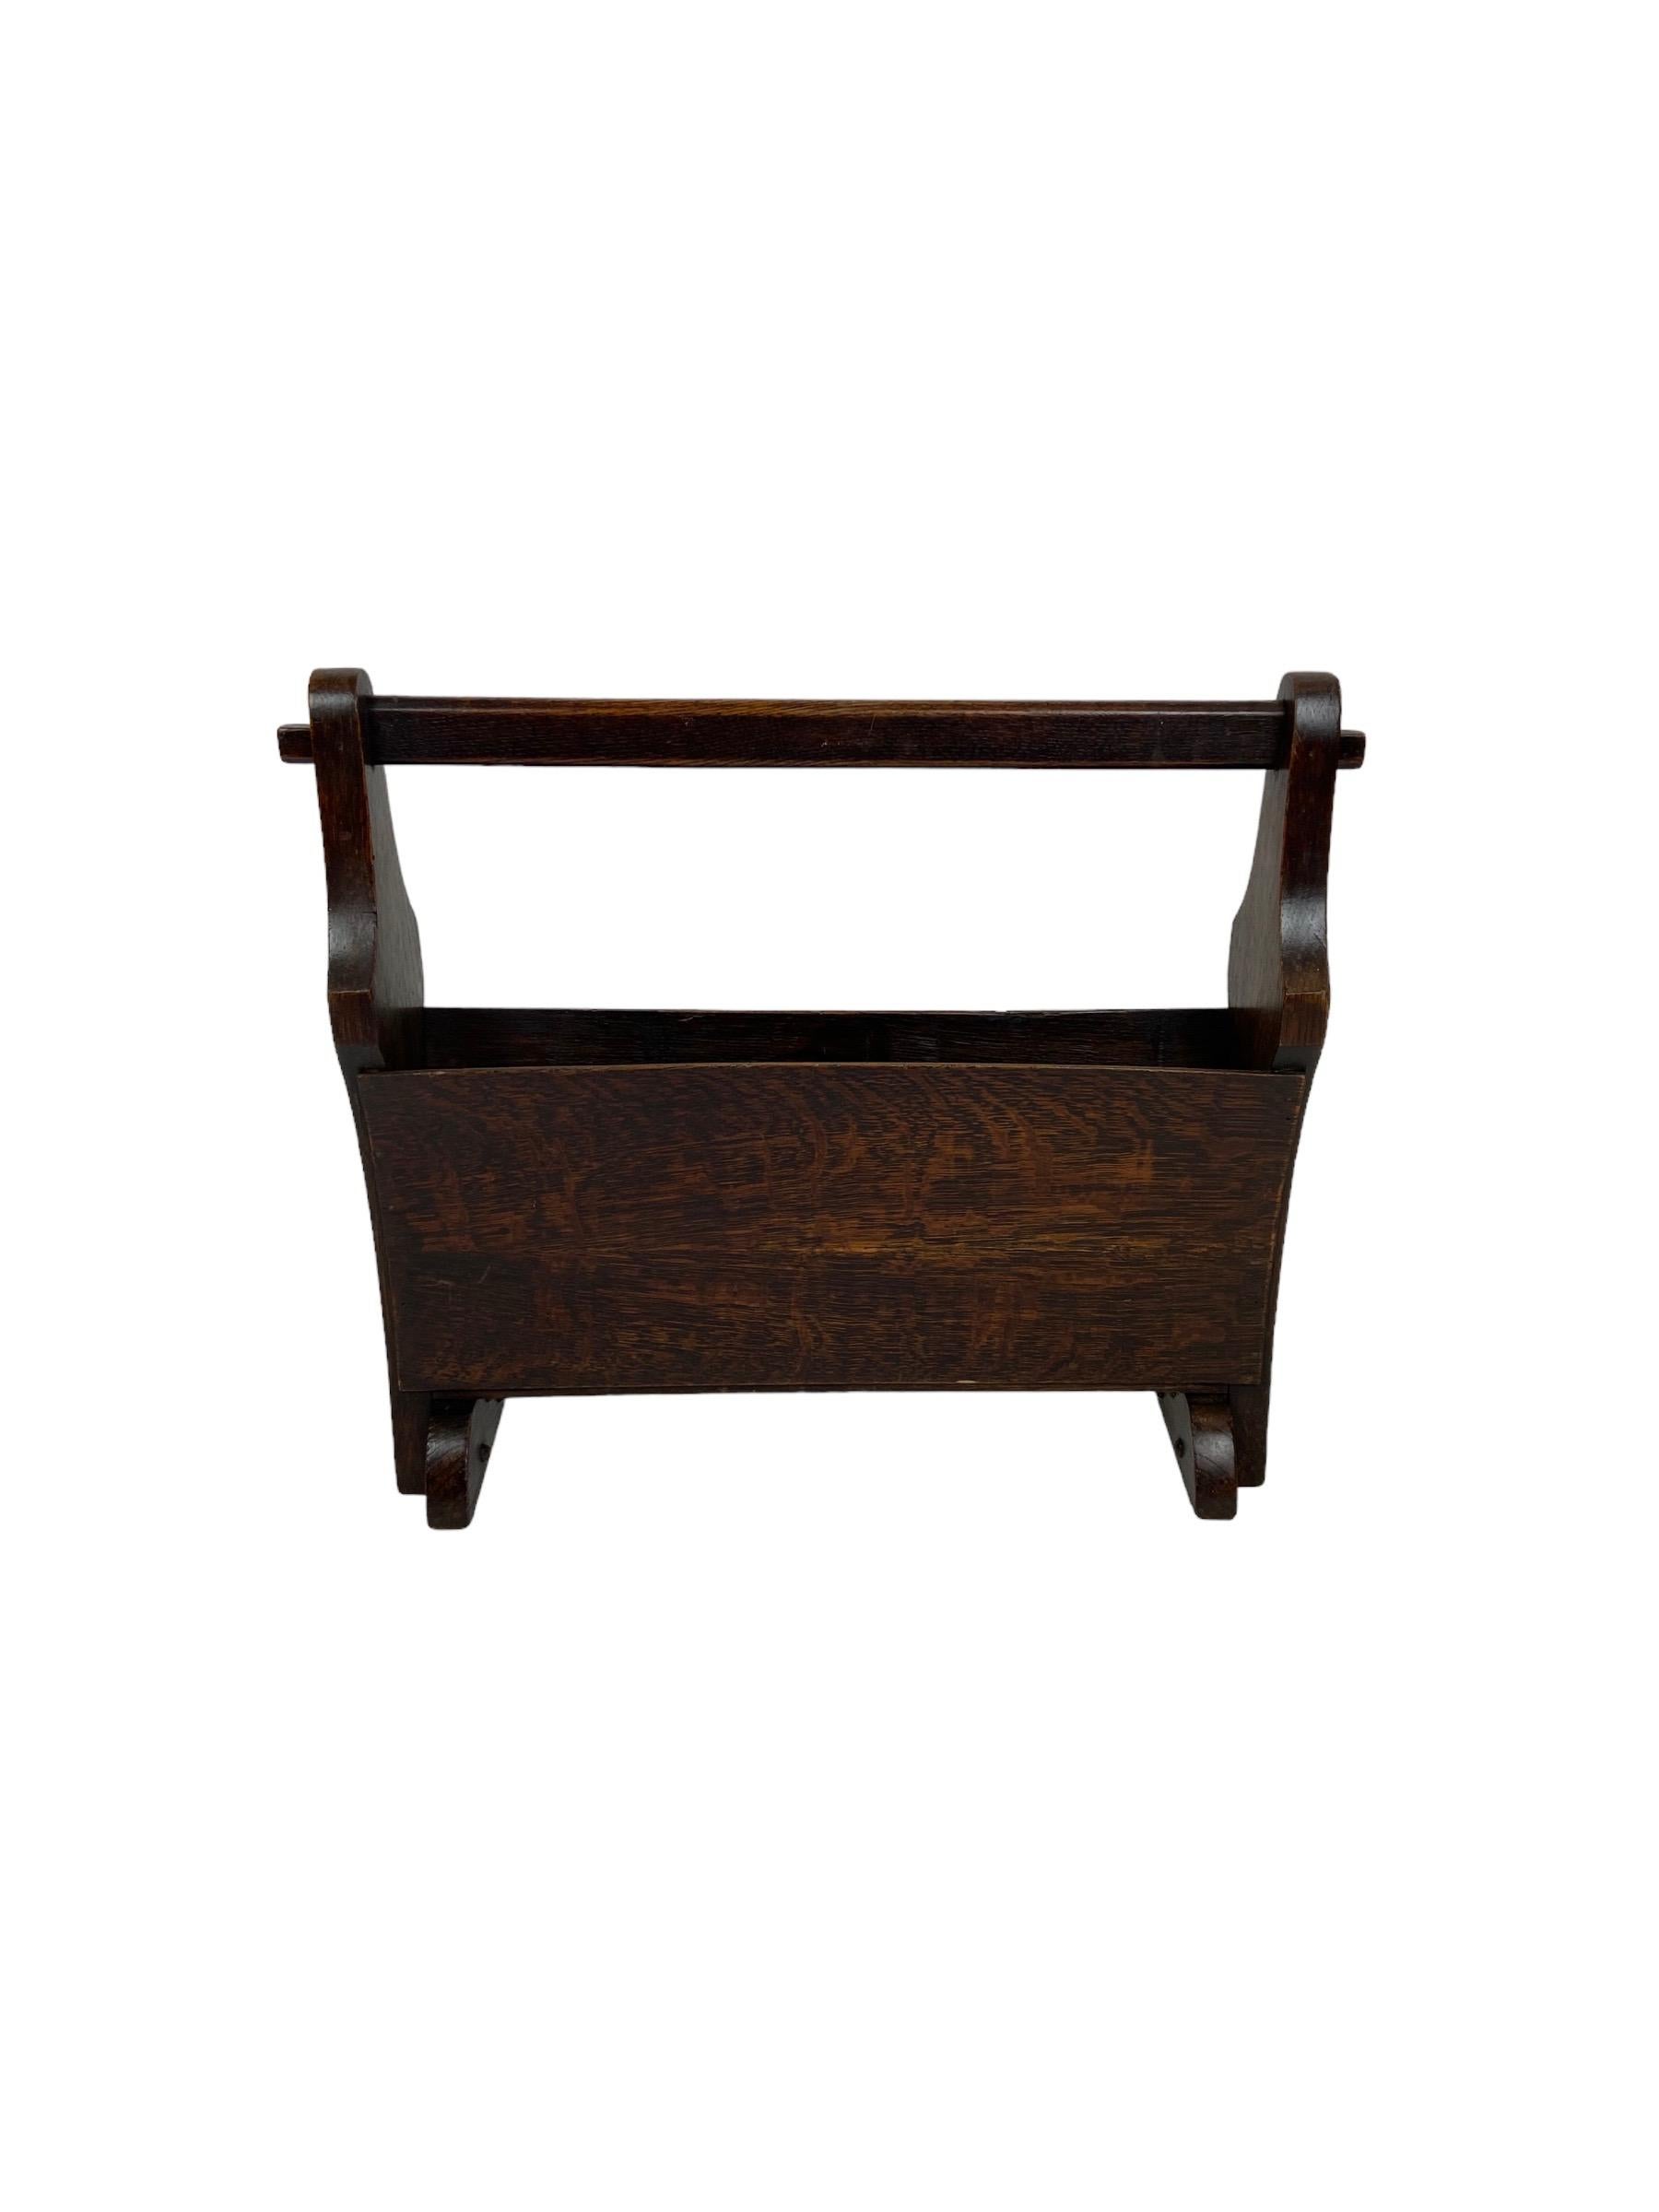 Art Deco magazine rack made of oak wood in the 1930s in The Netherlands.

Height 40 cm width 50 cm depth 14 cm.